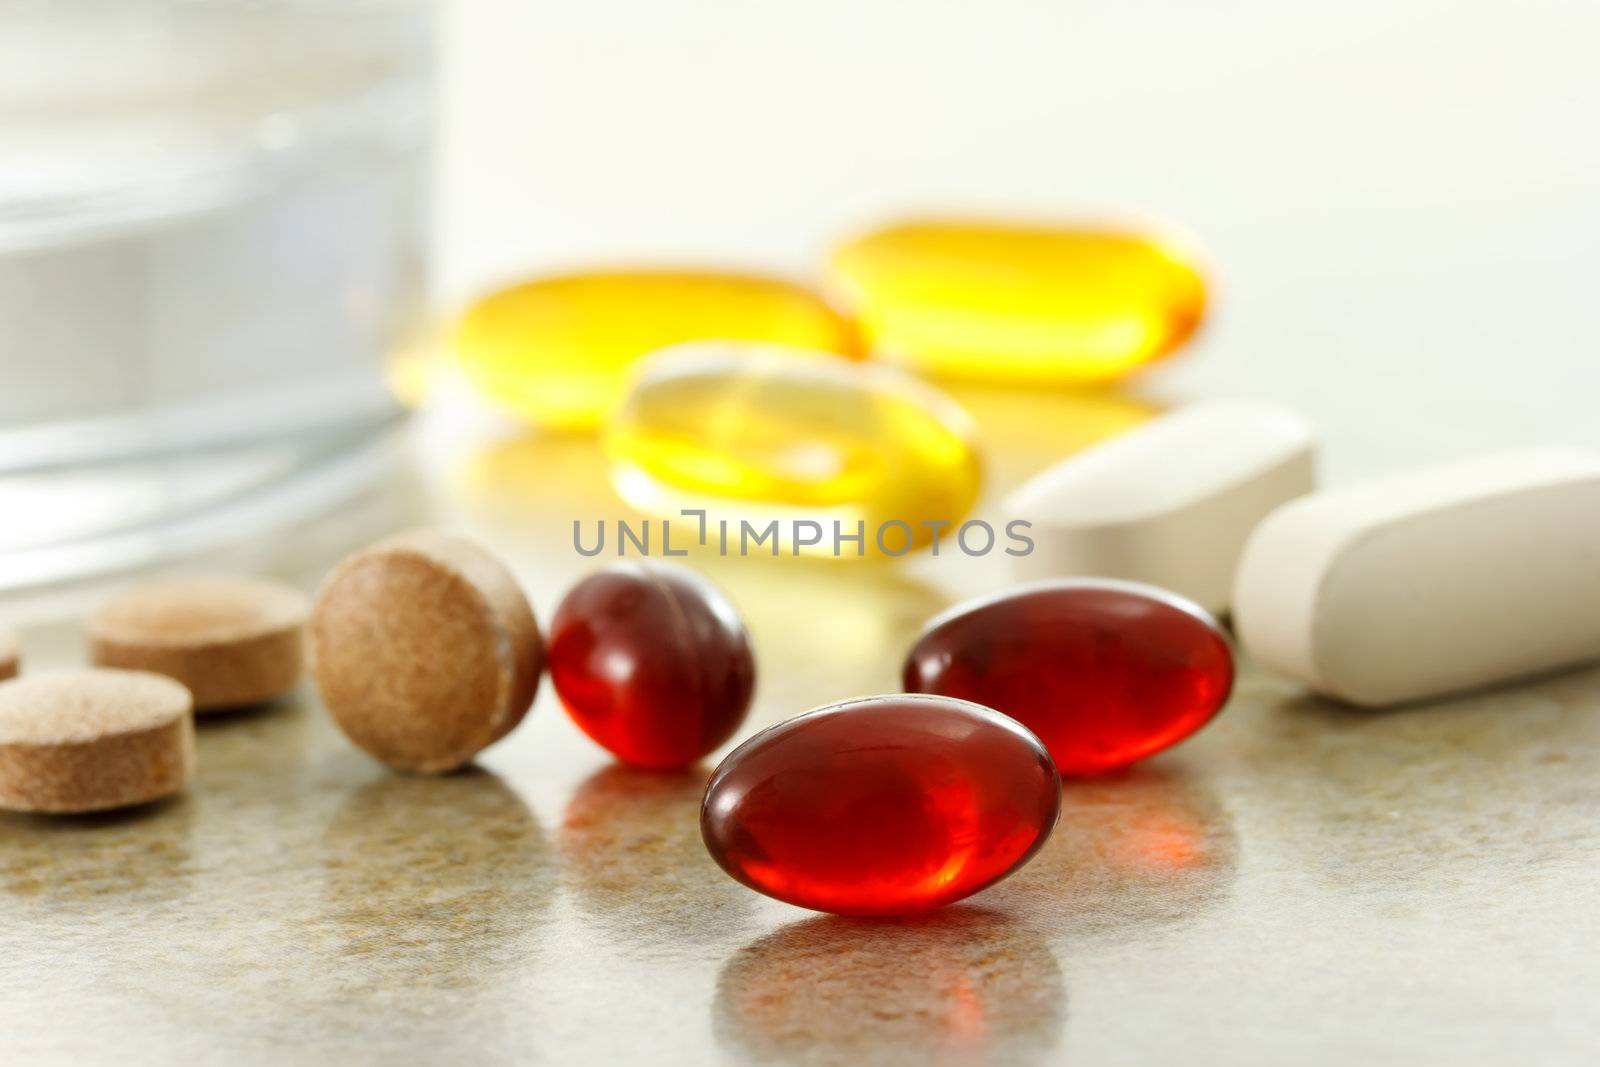 Supplement capsules and glass of water